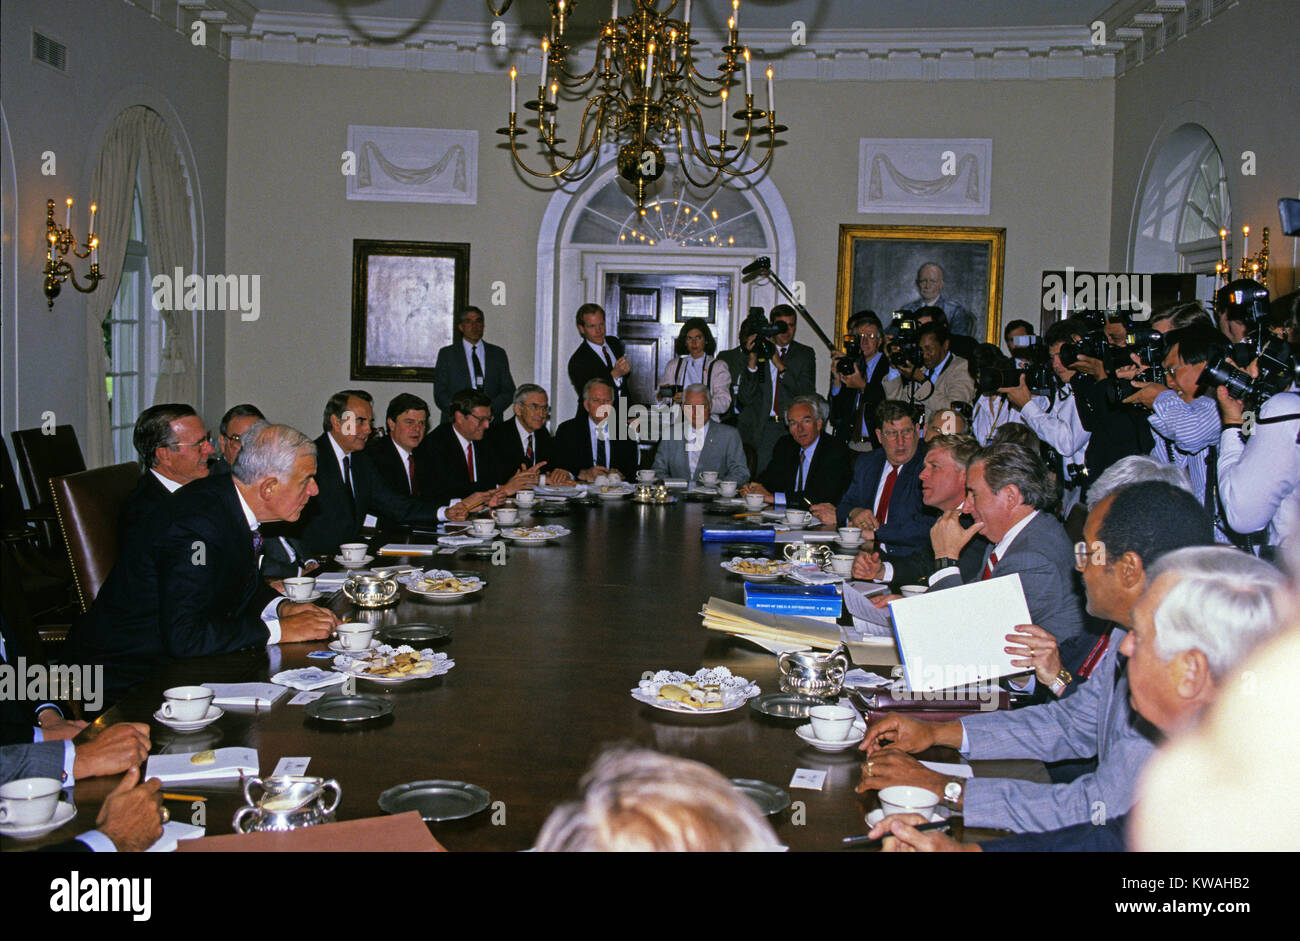 Washington, District of Columbia, USA. 15th May, 1990. United States President George H.W. Bush meets with bipartisan, bicameral Congressional budget negotiators in the Cabinet Room of the White House in Washington, DC on May 15, 1990. Credit: Ron Sachs/CNP Credit: Ron Sachs/CNP/ZUMA Wire/Alamy Live News Stock Photo